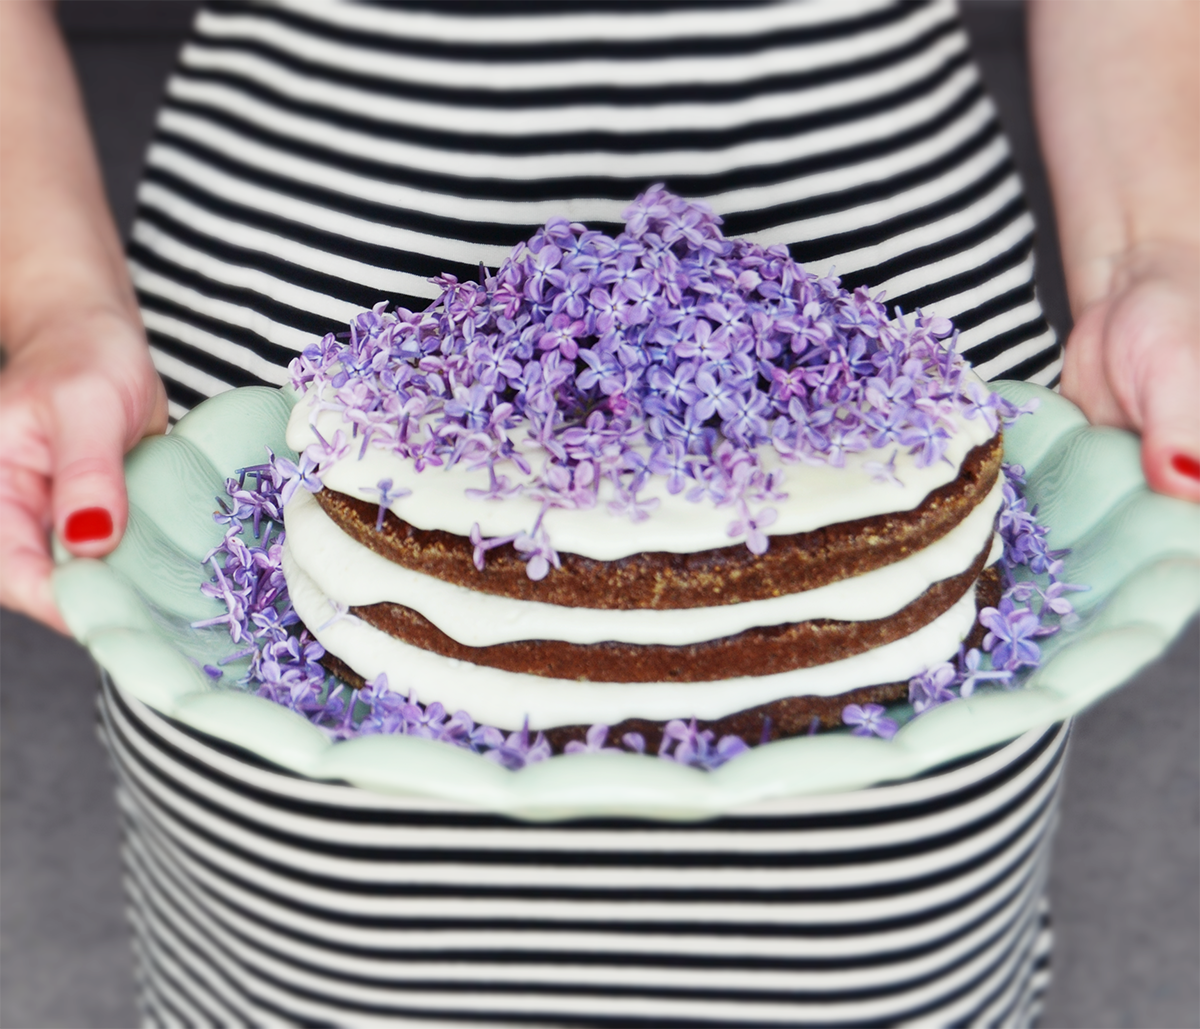 from issue 8 - recipe for chocolate cake with lilac cream - Photo: Emelie Ekborg